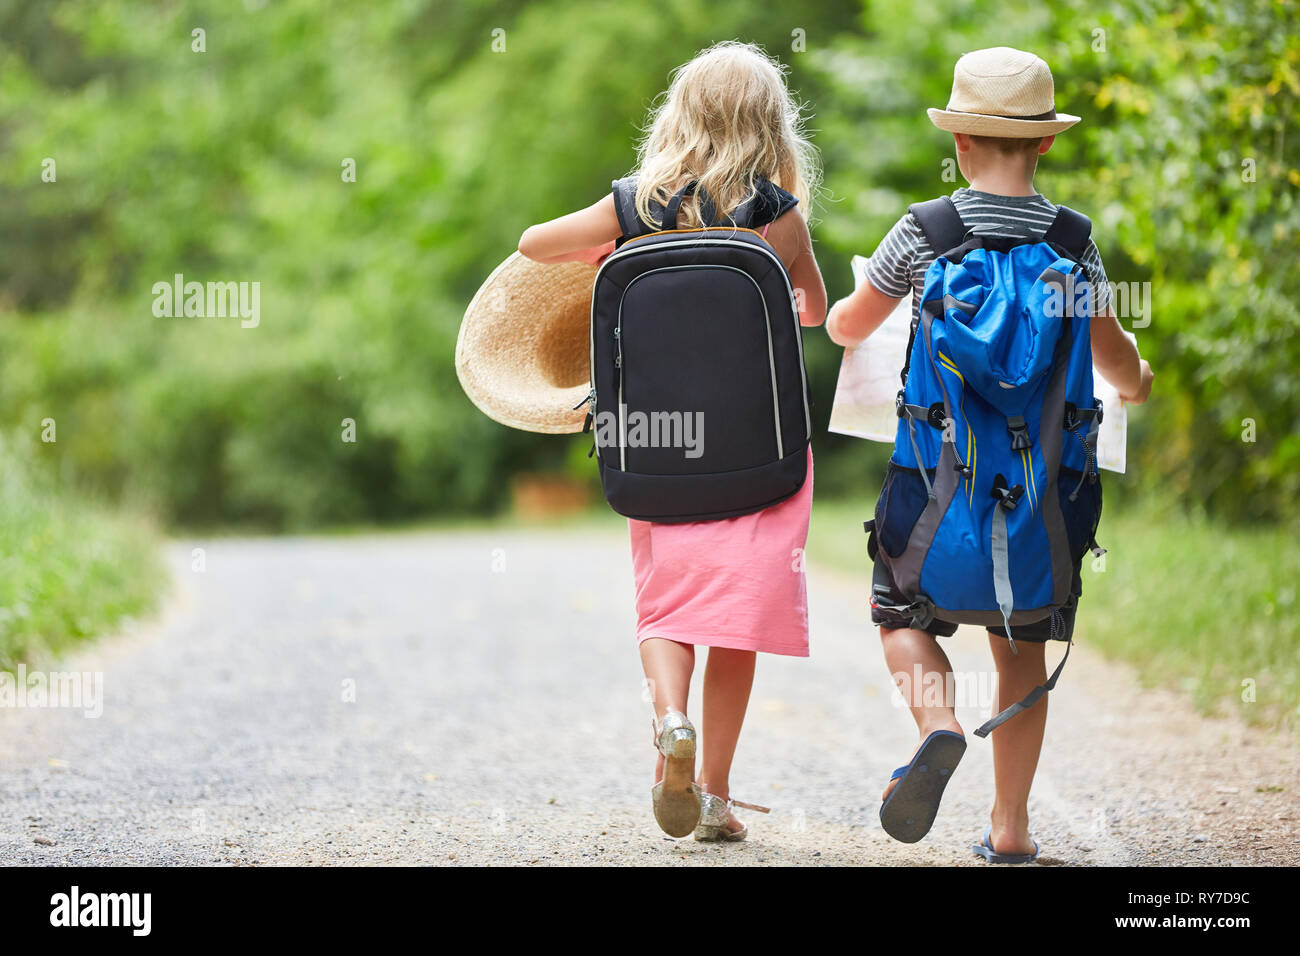 Two kids go hiking together in nature with backpack and map Stock Photo